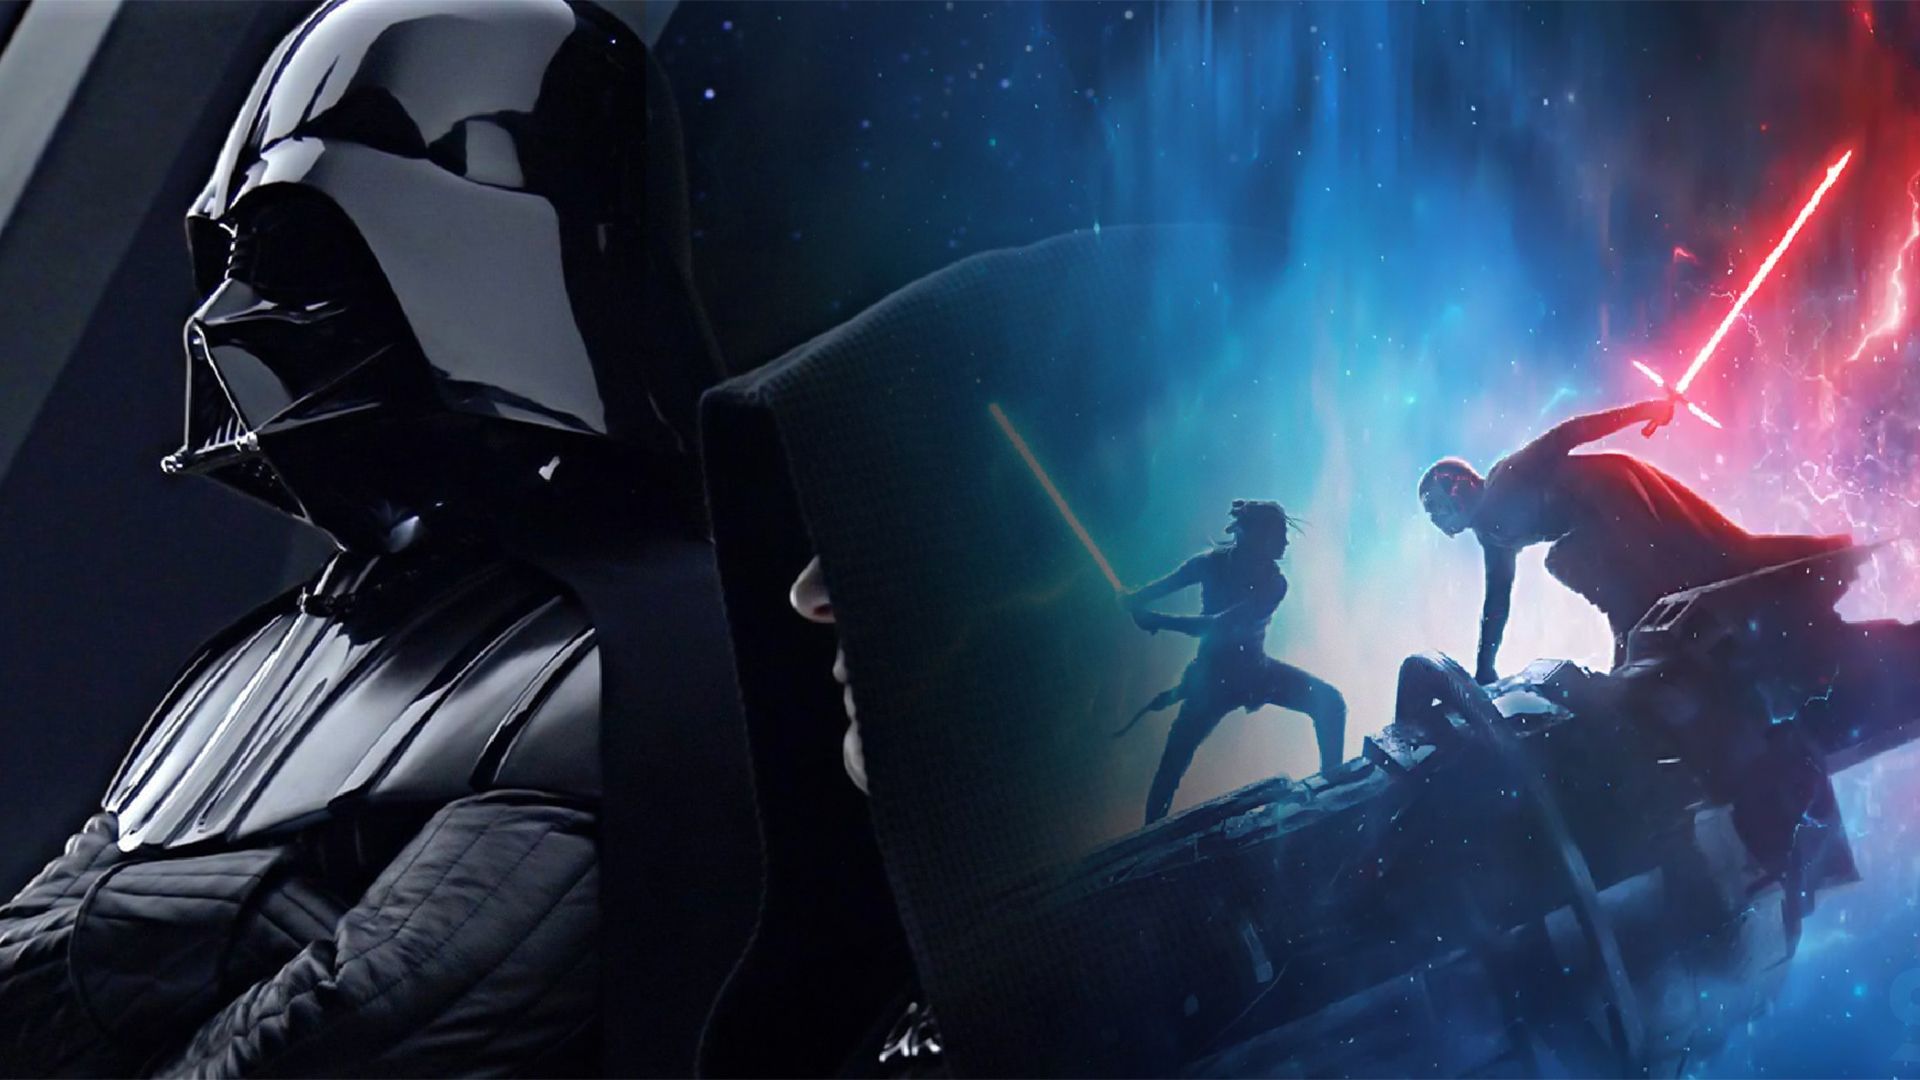 Darth Vader and The Rise of Skywalker Video Image